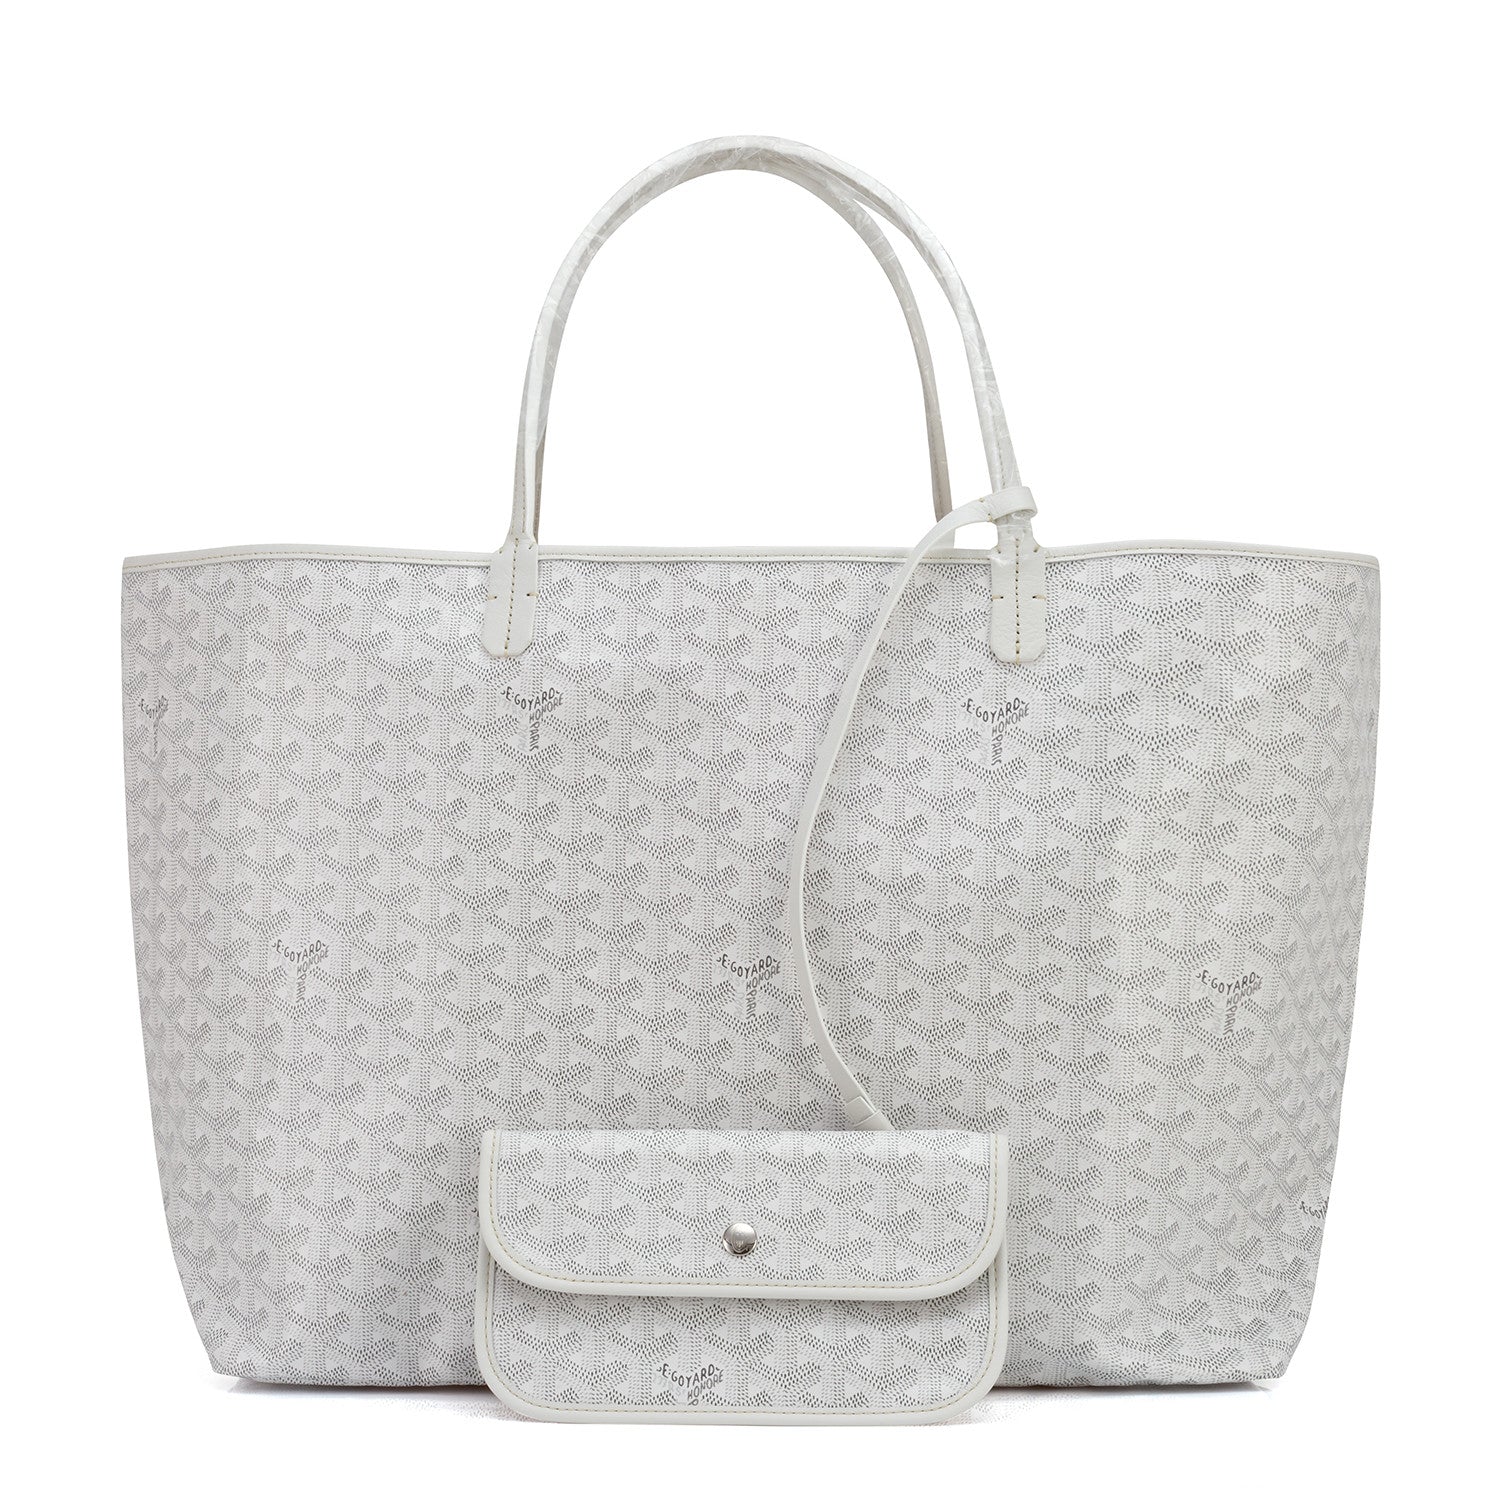 This is the cult-favorite Goyard Chevron Tote in the stunning